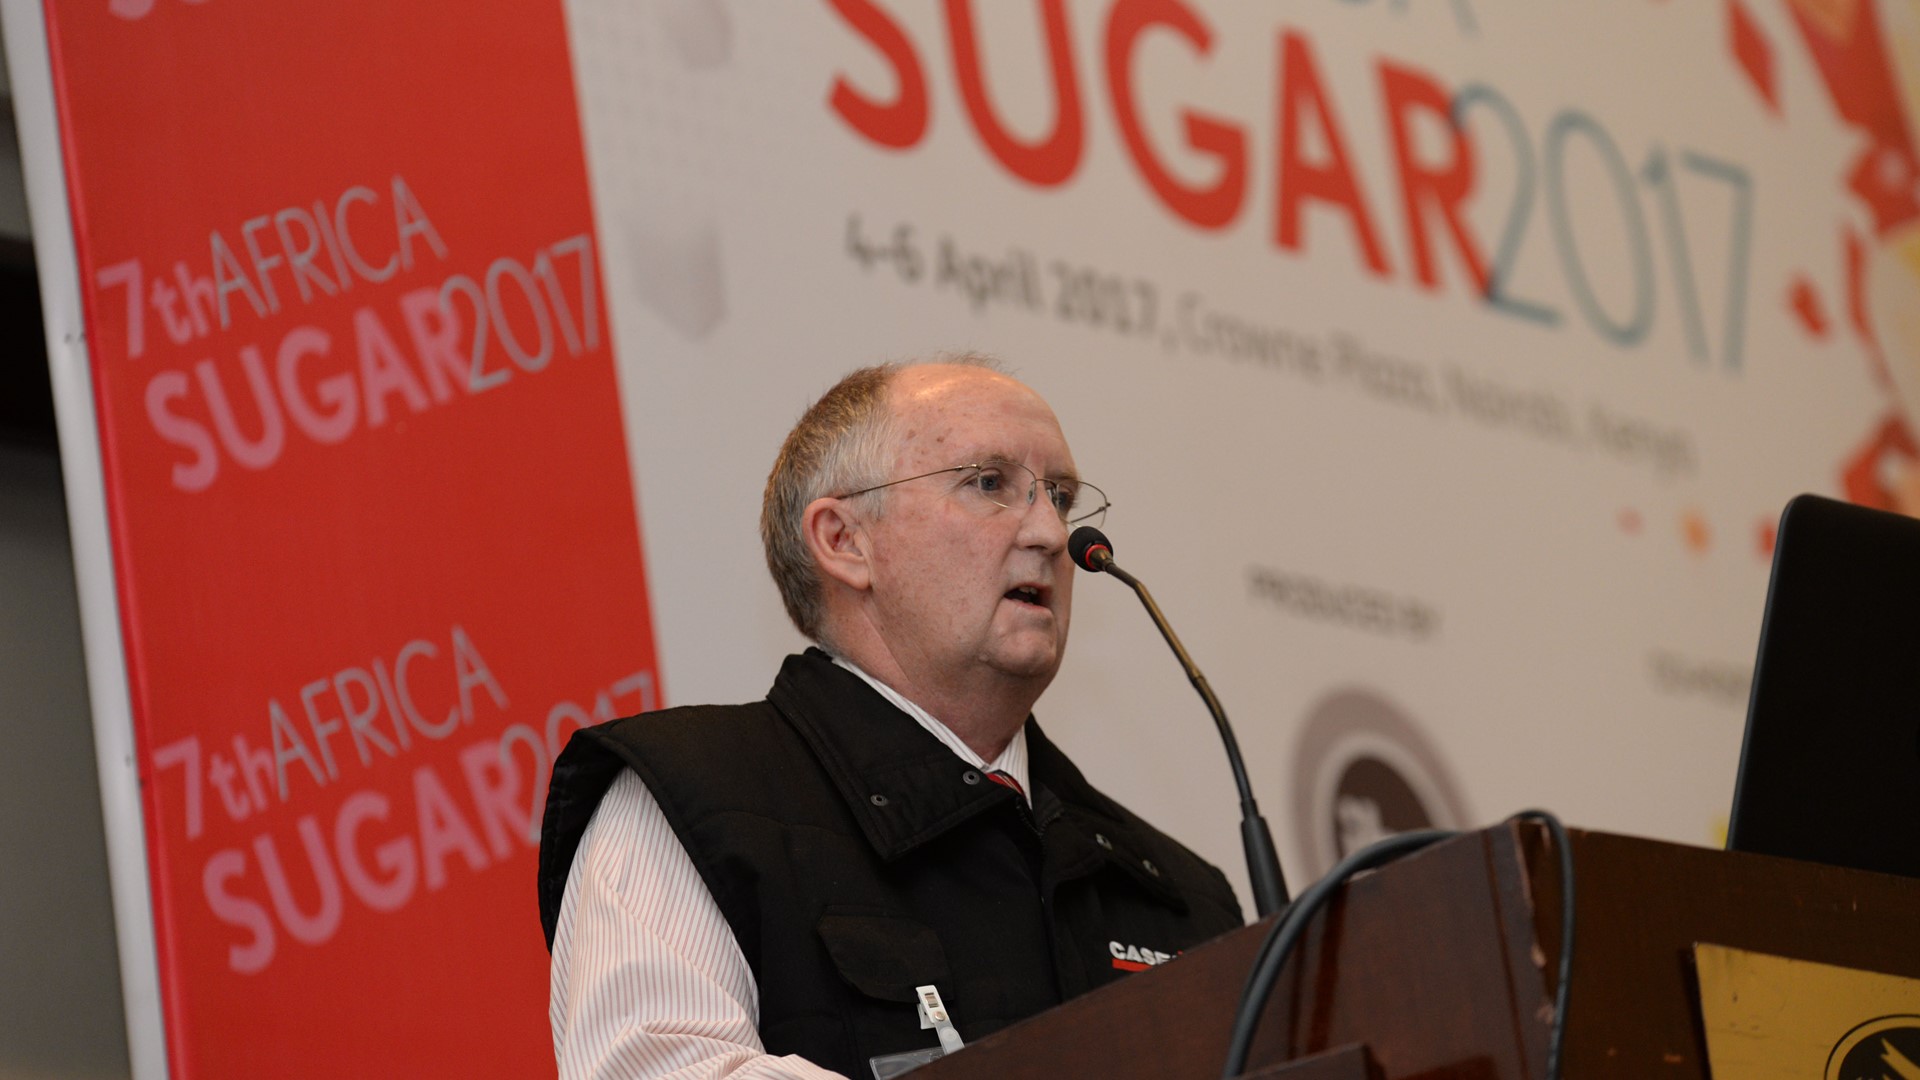 Speakers at the event included Ian Allen, General Manager of the Agricultural division of Case IH distributor in Kenya